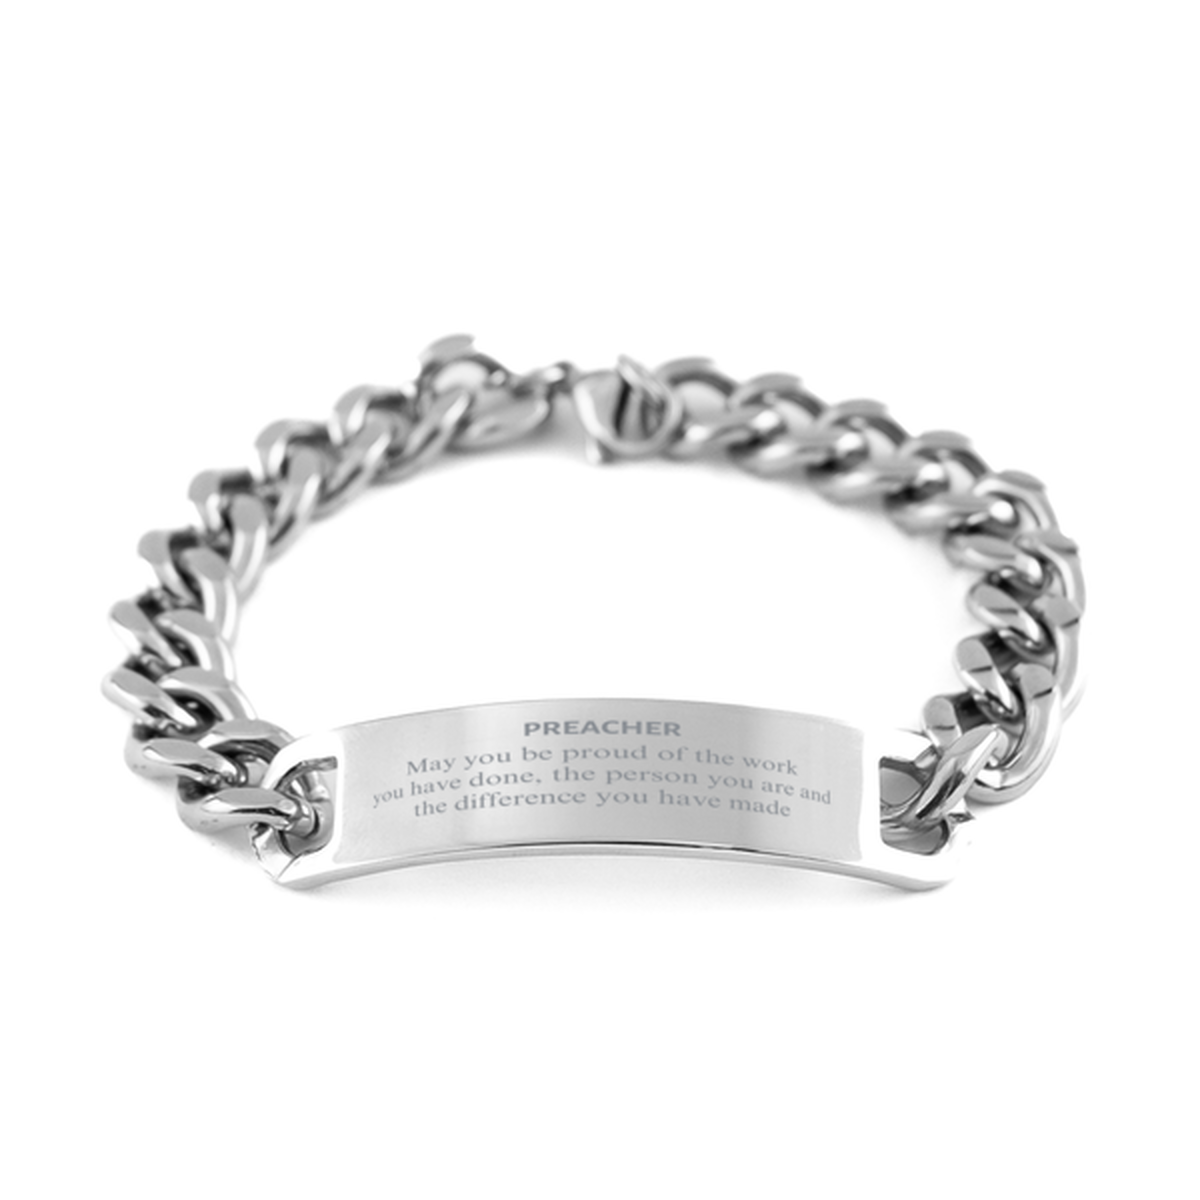 Preacher May you be proud of the work you have done, Retirement Preacher Cuban Chain Stainless Steel Bracelet for Colleague Appreciation Gifts Amazing for Preacher